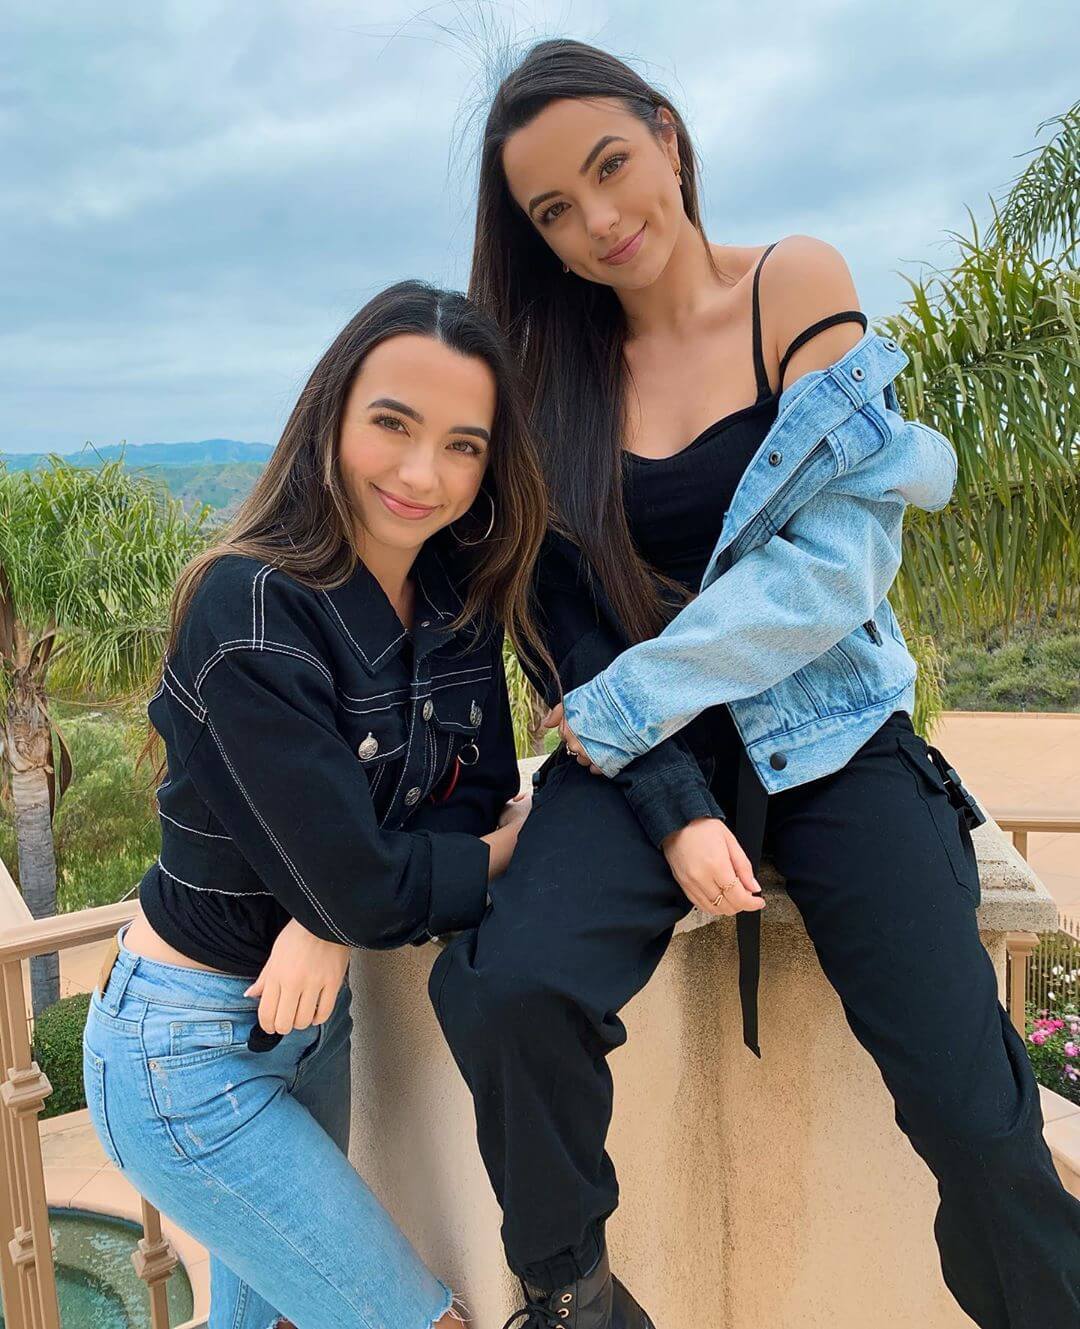 61 Merrell Twins Sexy pictures That Will Make Your Heart Pound For Her.